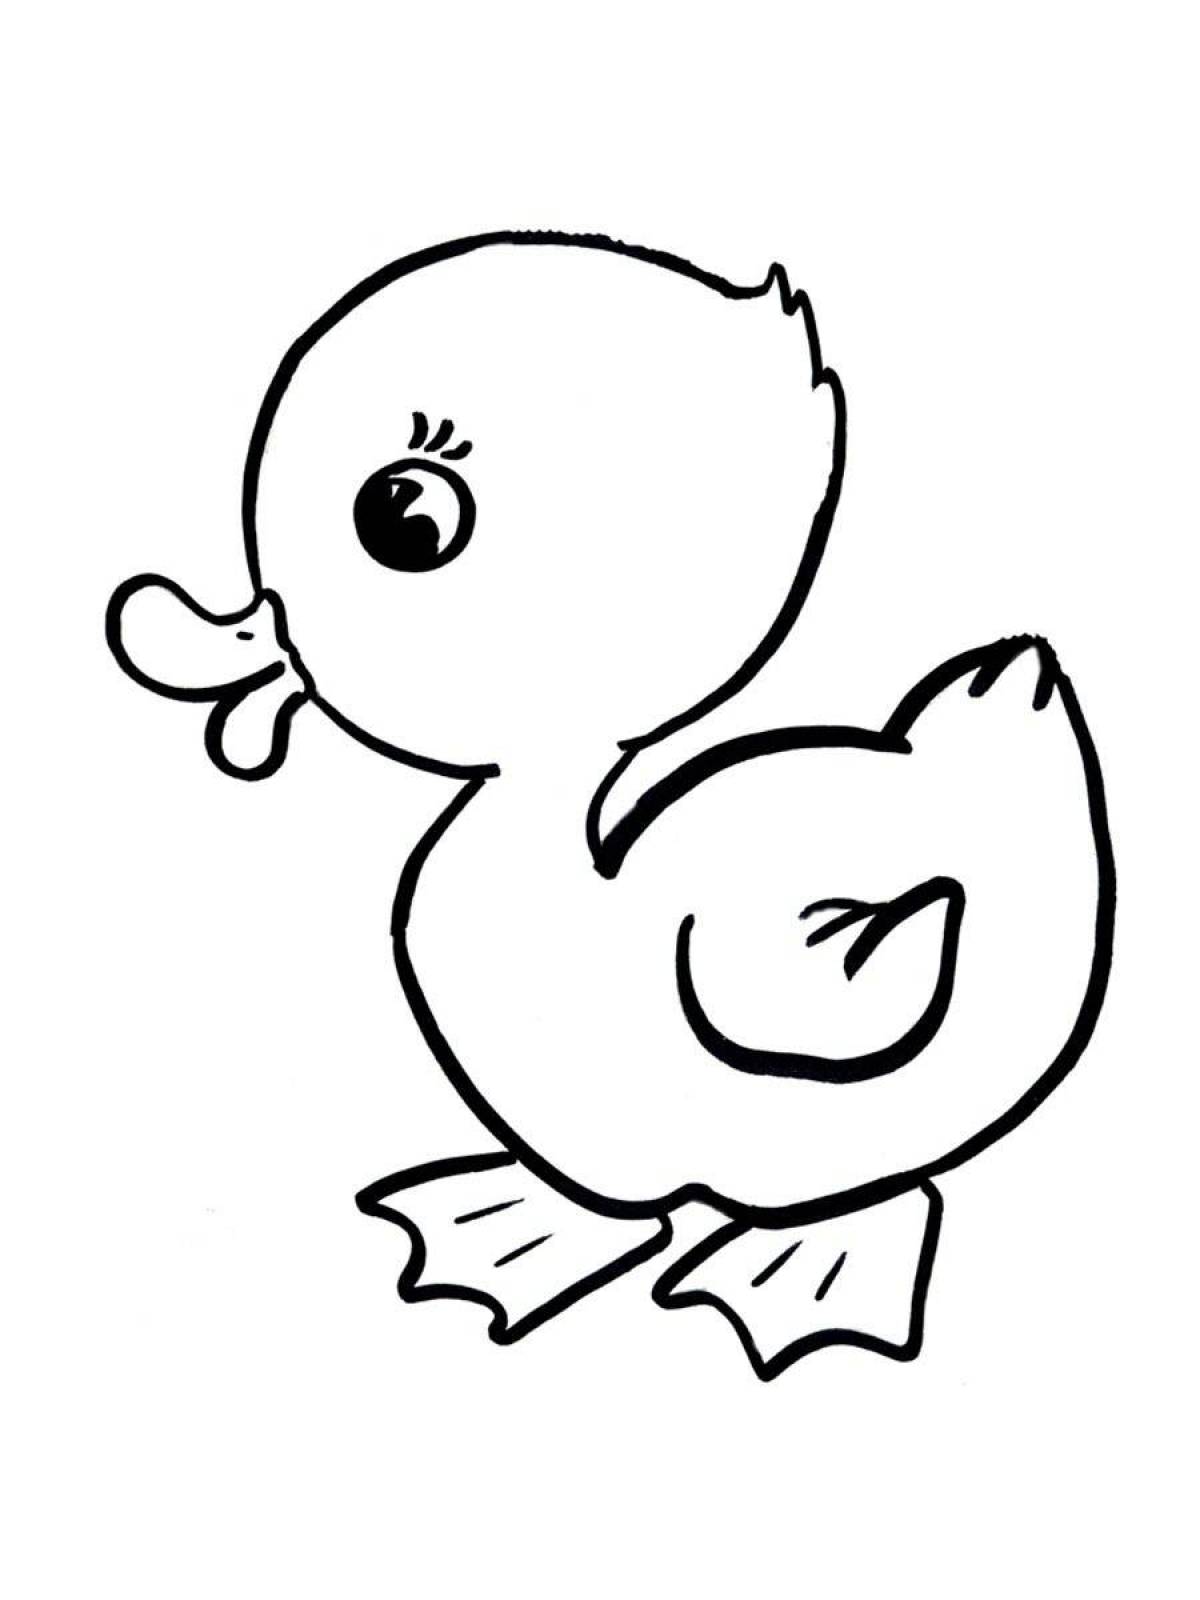 Duckling for kids #4